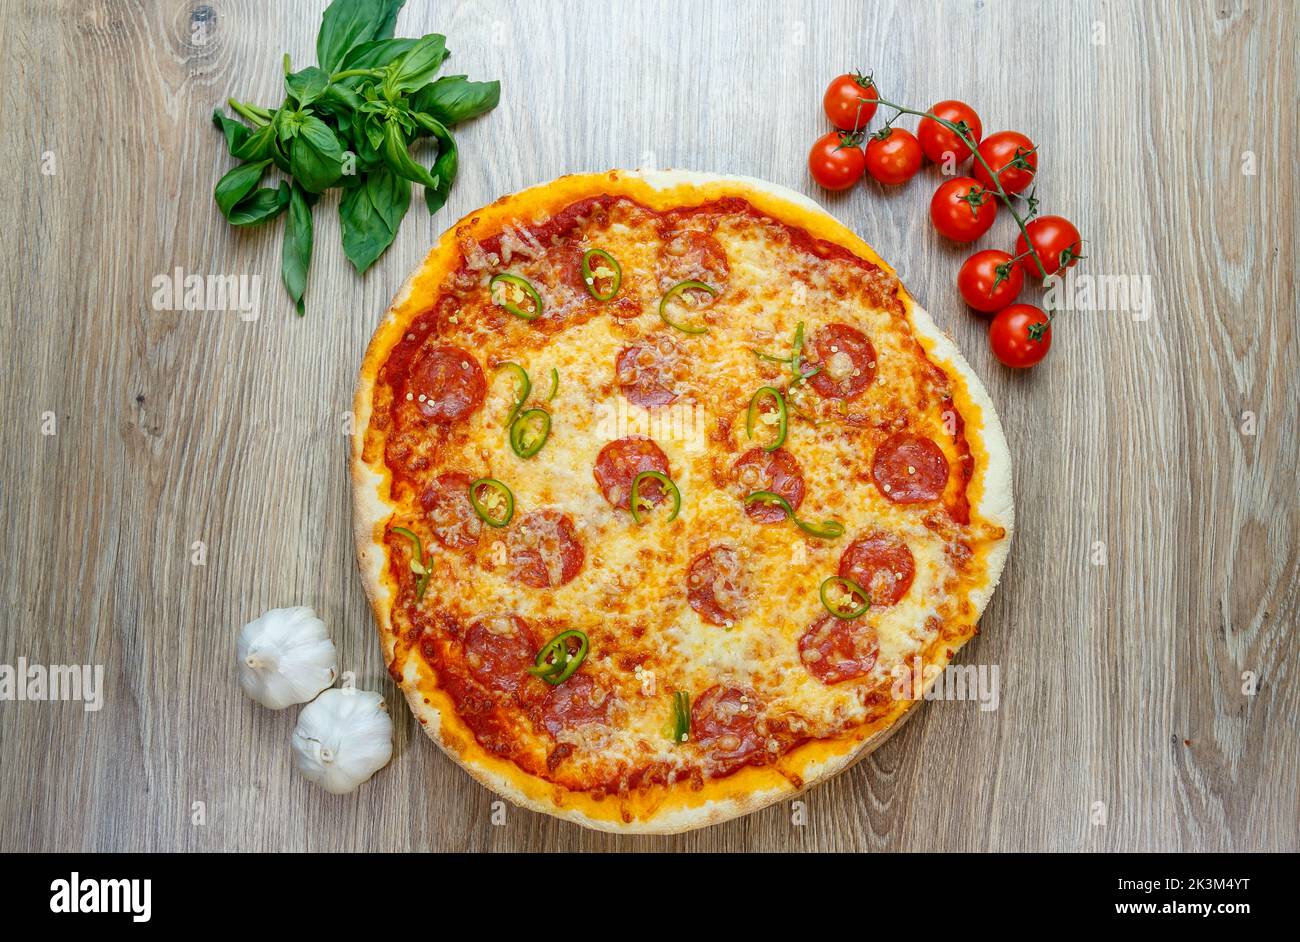 A top view of Pizza Diavola with salami, mozzarella, green hot pepper with ingredients next to it on a wooden table Stock Photo